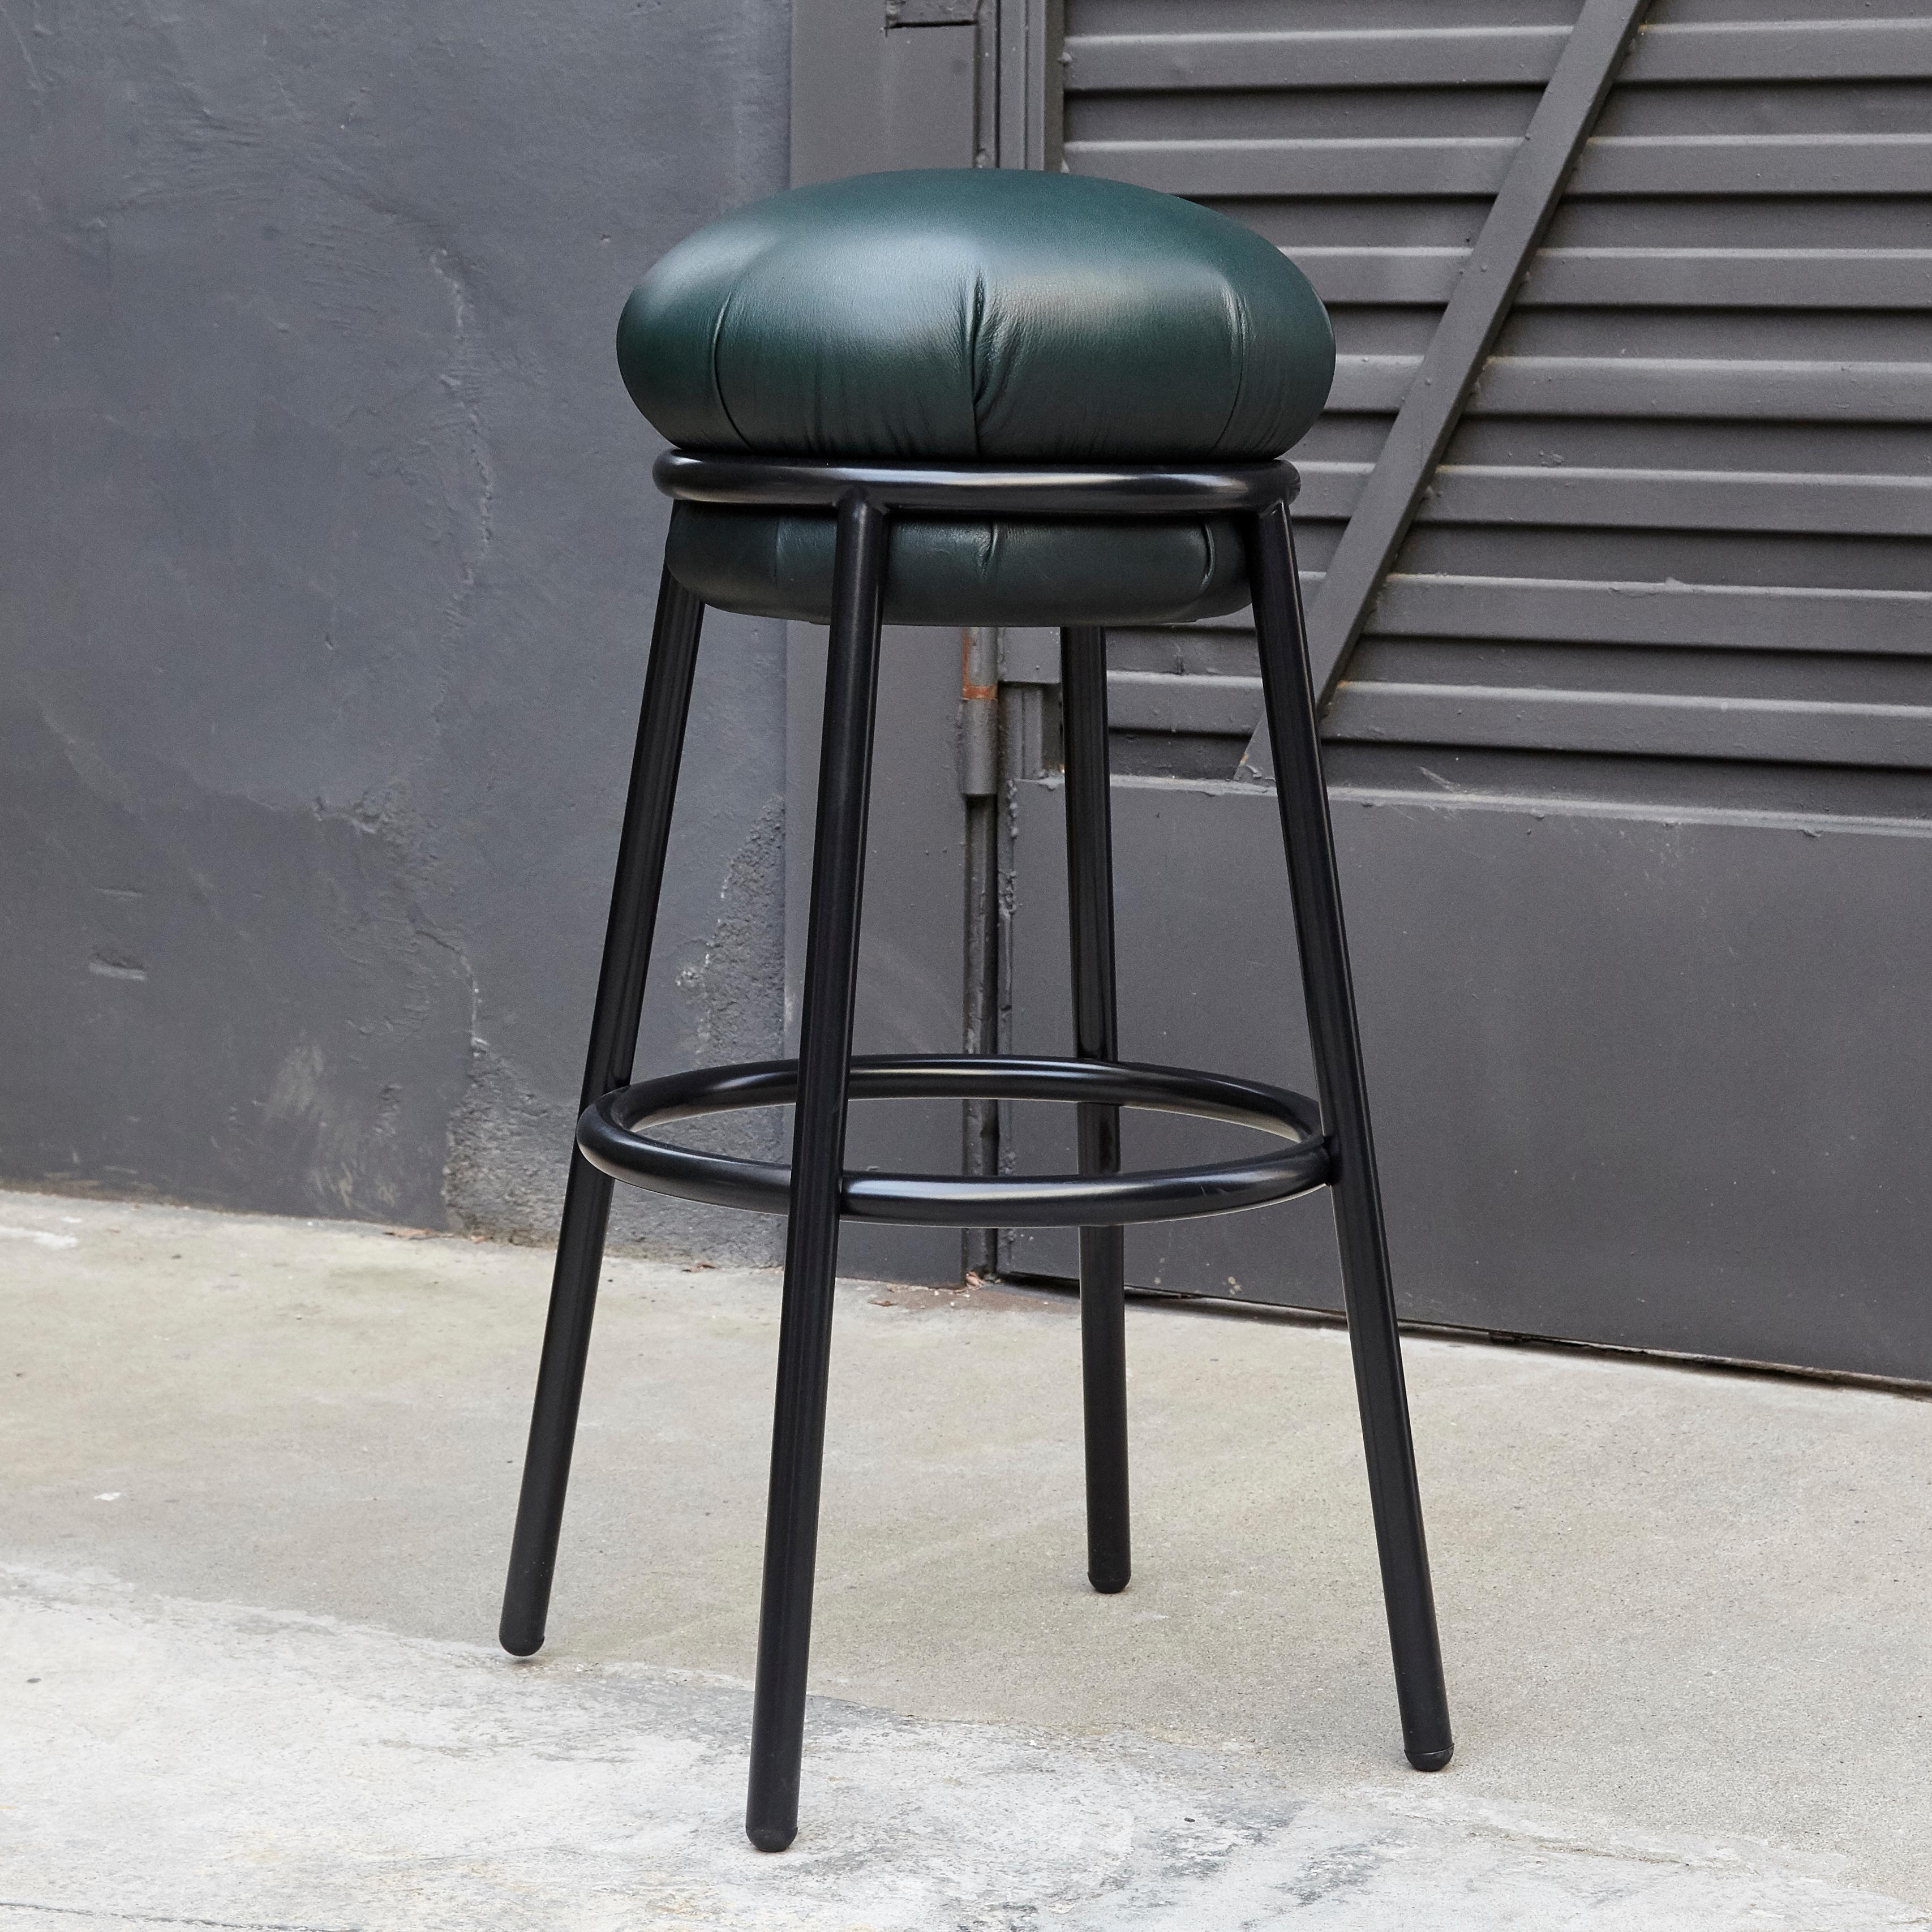 Organic Modern Stephen Burks Grasso Contemporary Green Leather, Black Lacquered Metal Stool